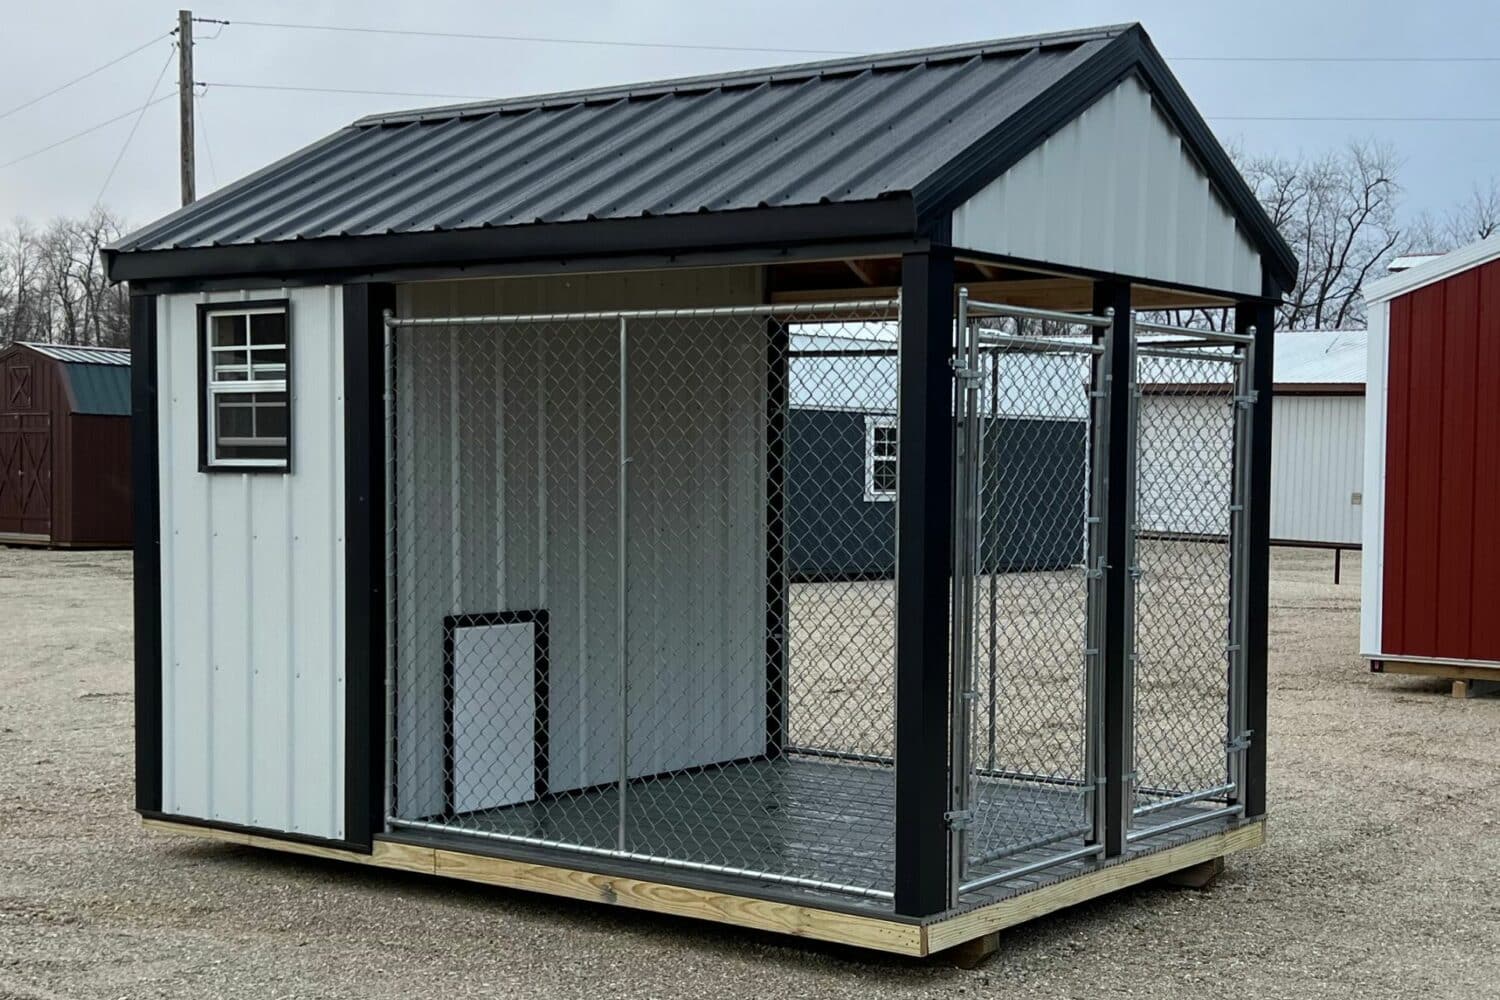 Animal Shelter and Sheds In Advance MO